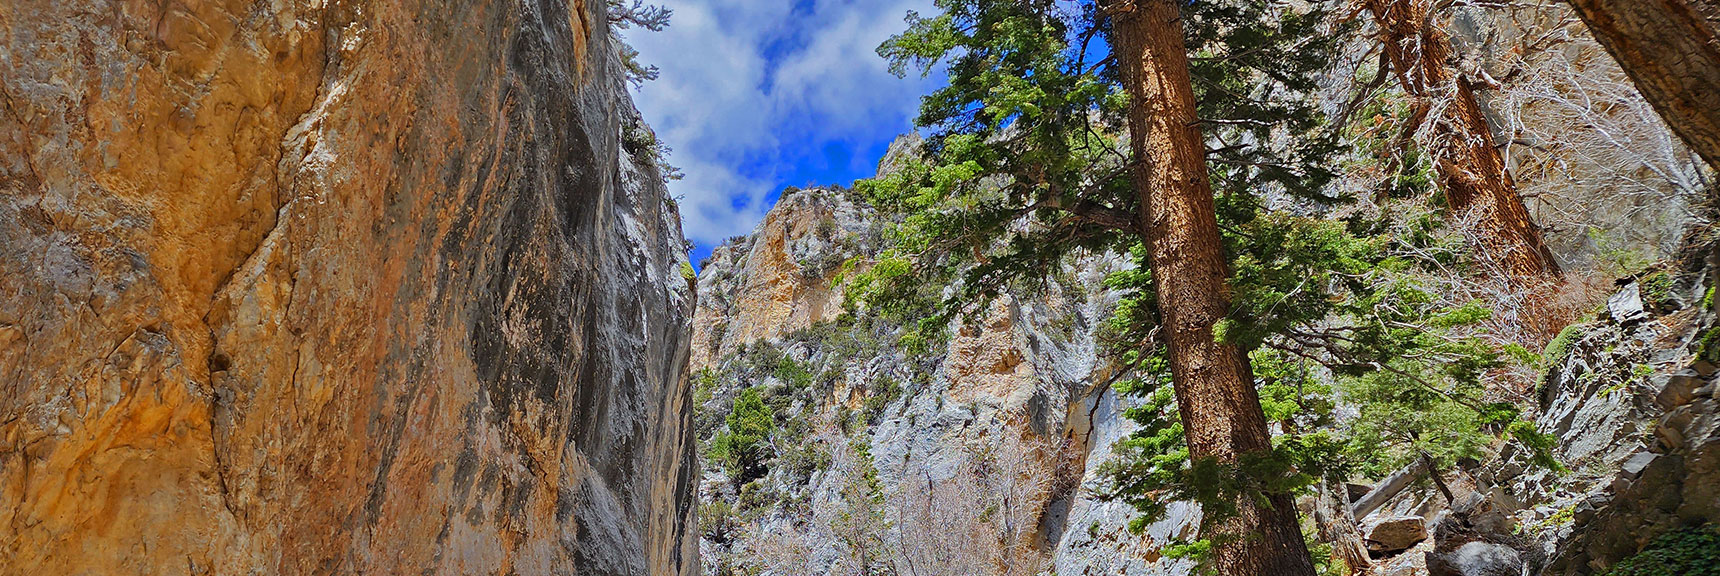 Continuing Up the Narrow Canyon. Took the Right Branch Below | Fletcher Canyon Trail | Mt Charleston Wilderness | Spring Mountains, Nevada